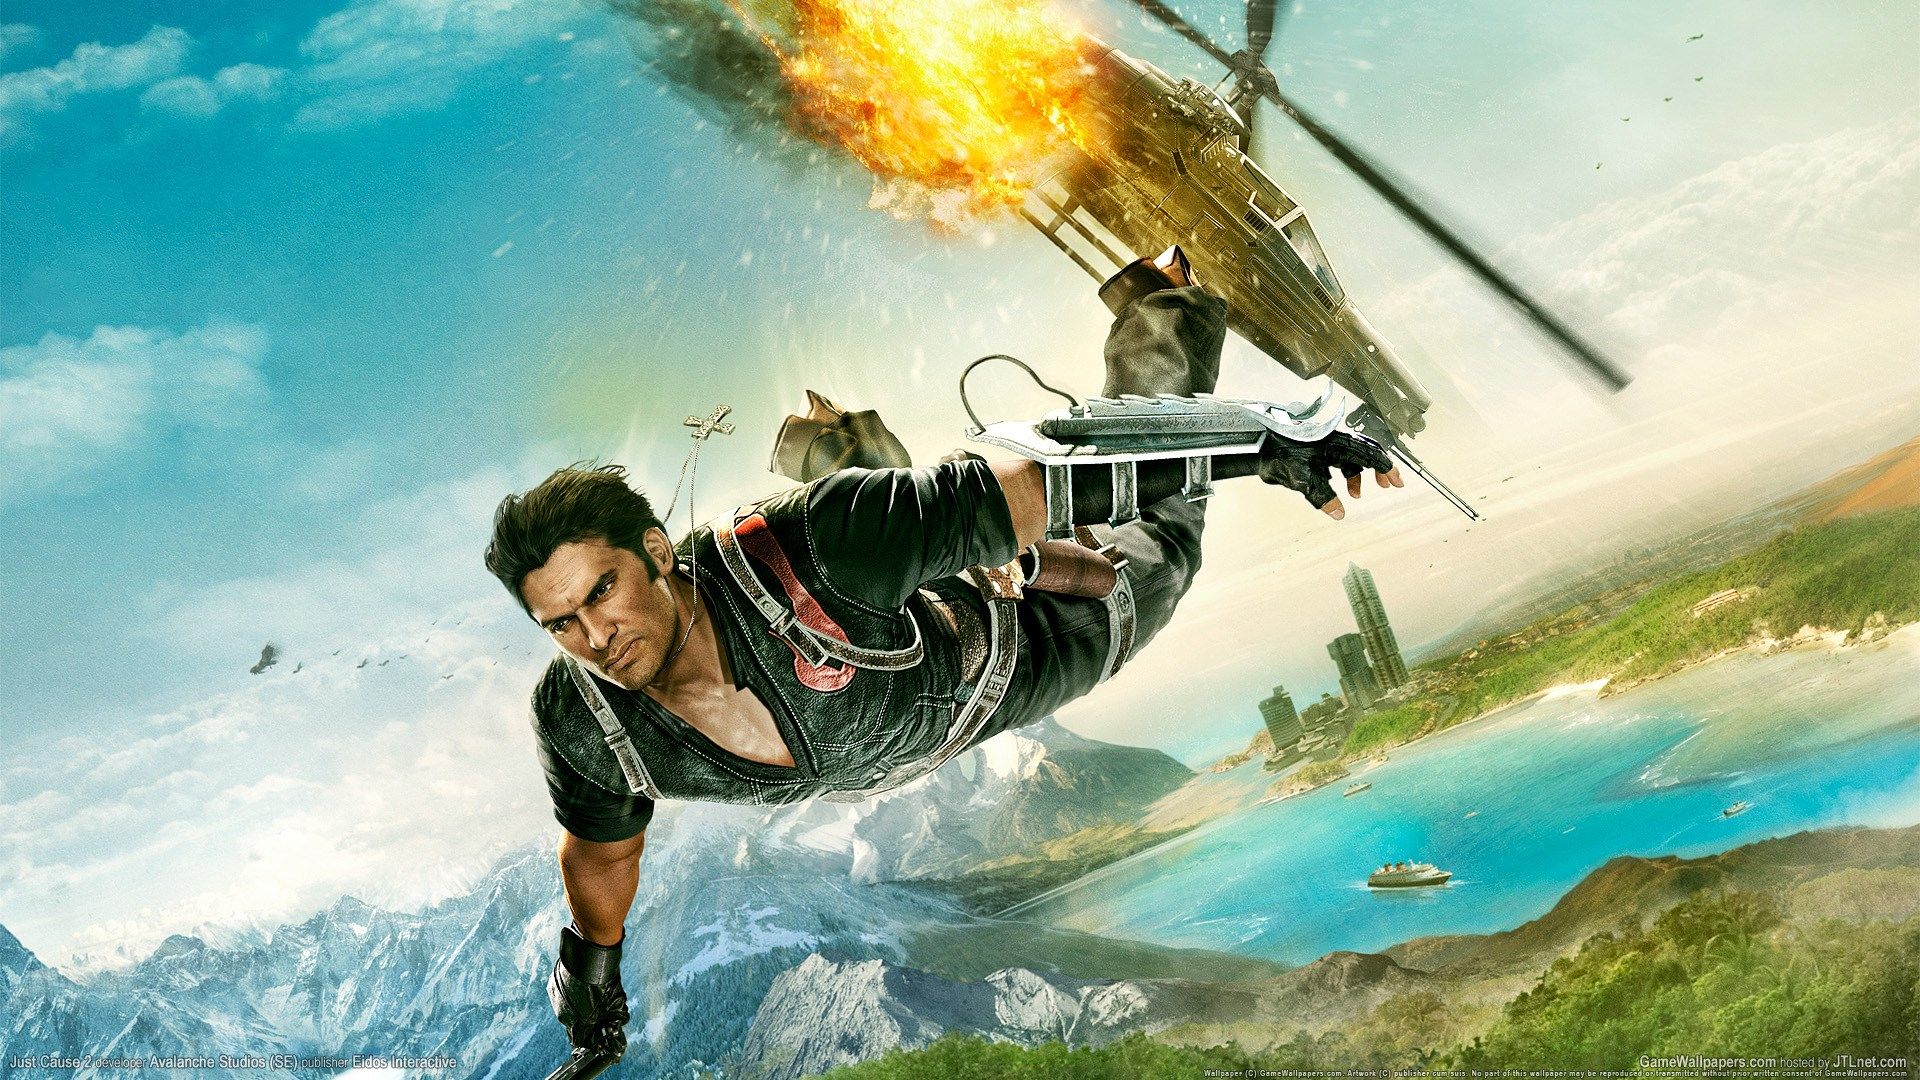 Quality Cool just cause 2 picture, 1920x1080 (640 kB). Just cause Adventure video game, Games